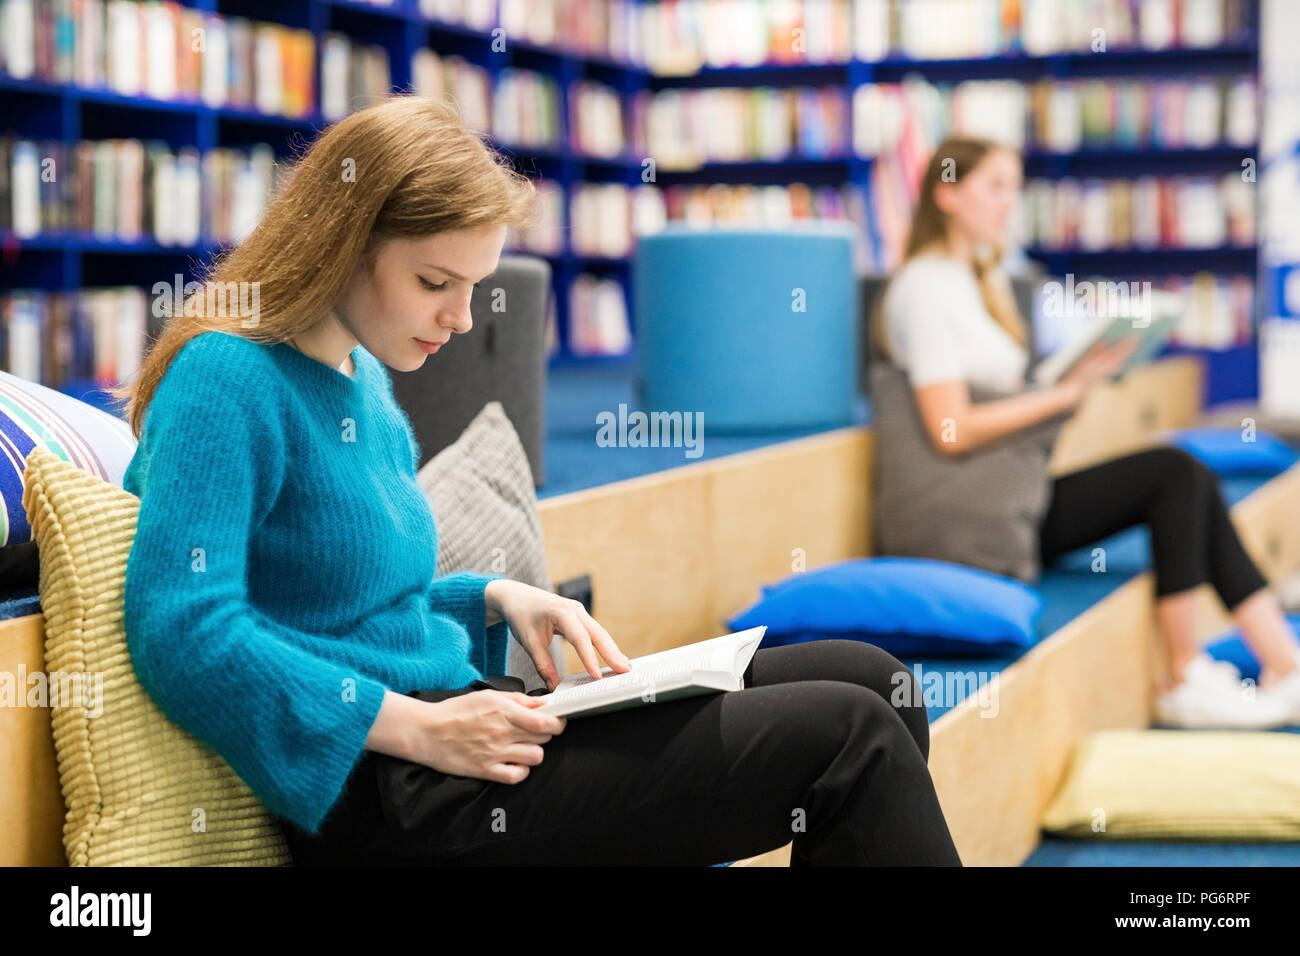 Teenage Girls sitting in a public library reading book Banque D'Images